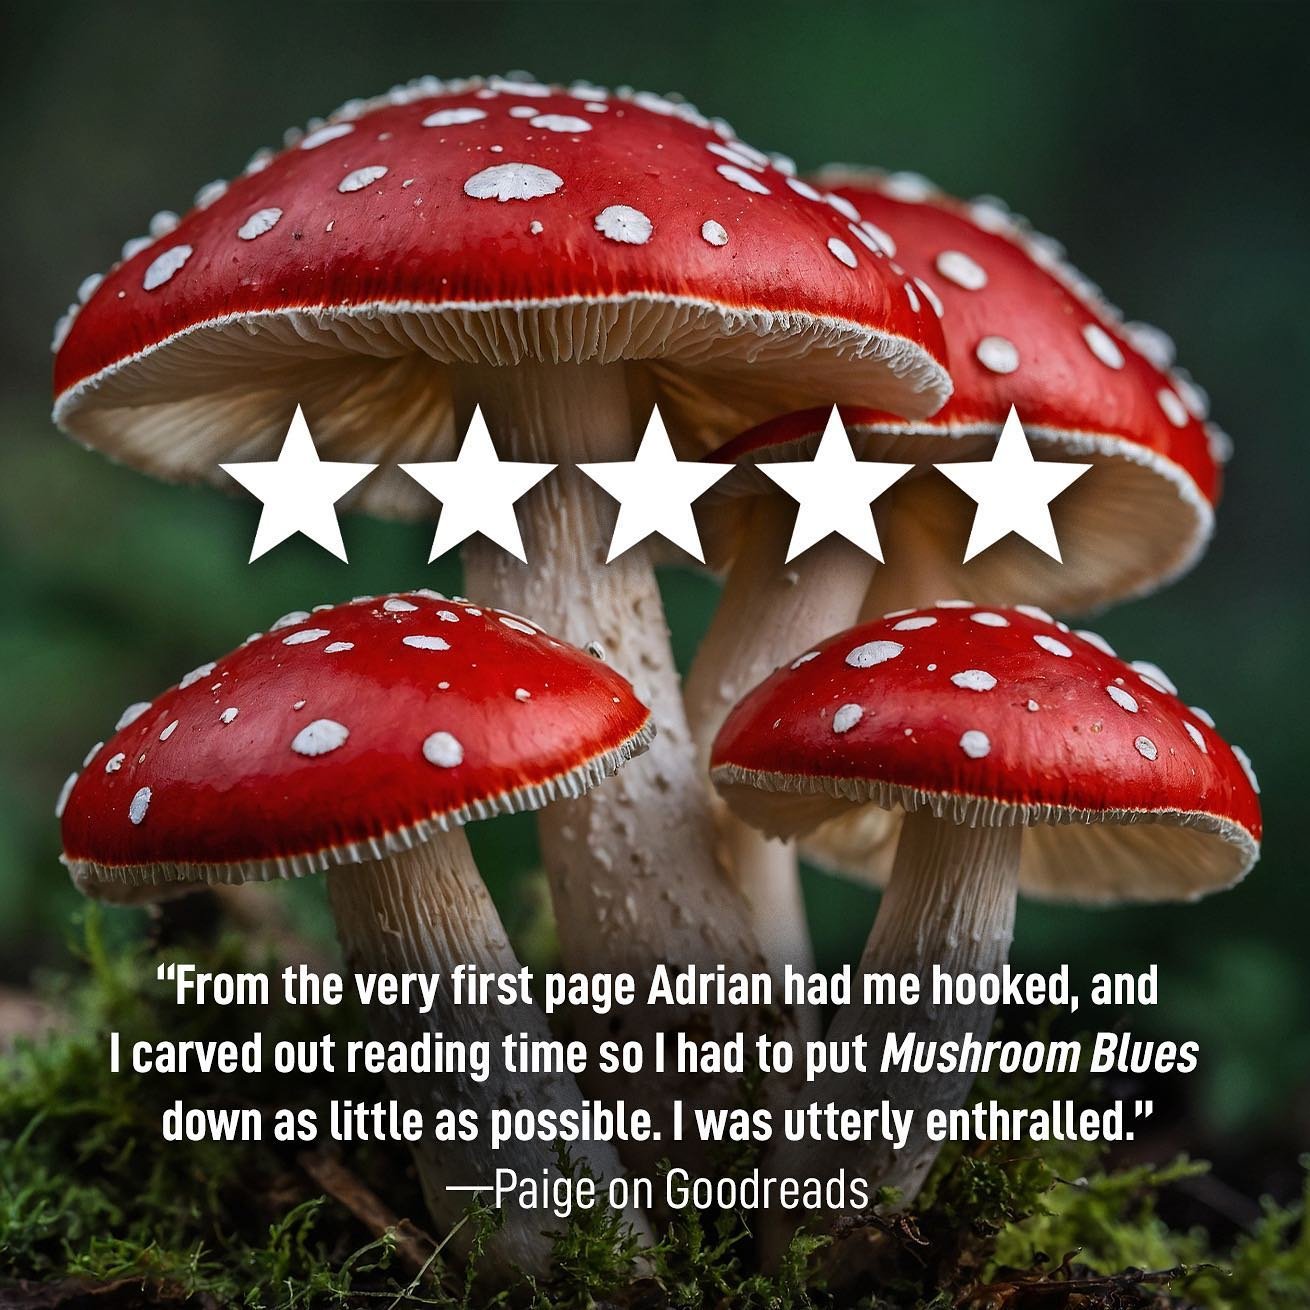 #MushroomBlues has been getting such positive reception from the blogging community, and this 5⭐️ from FanFiAddict reviewer @wordsofapaige is yet another that made my heart melt 🍄💙

BUY IT TODAY in paperback/hardcover/eBook on Amazon or read it FRE